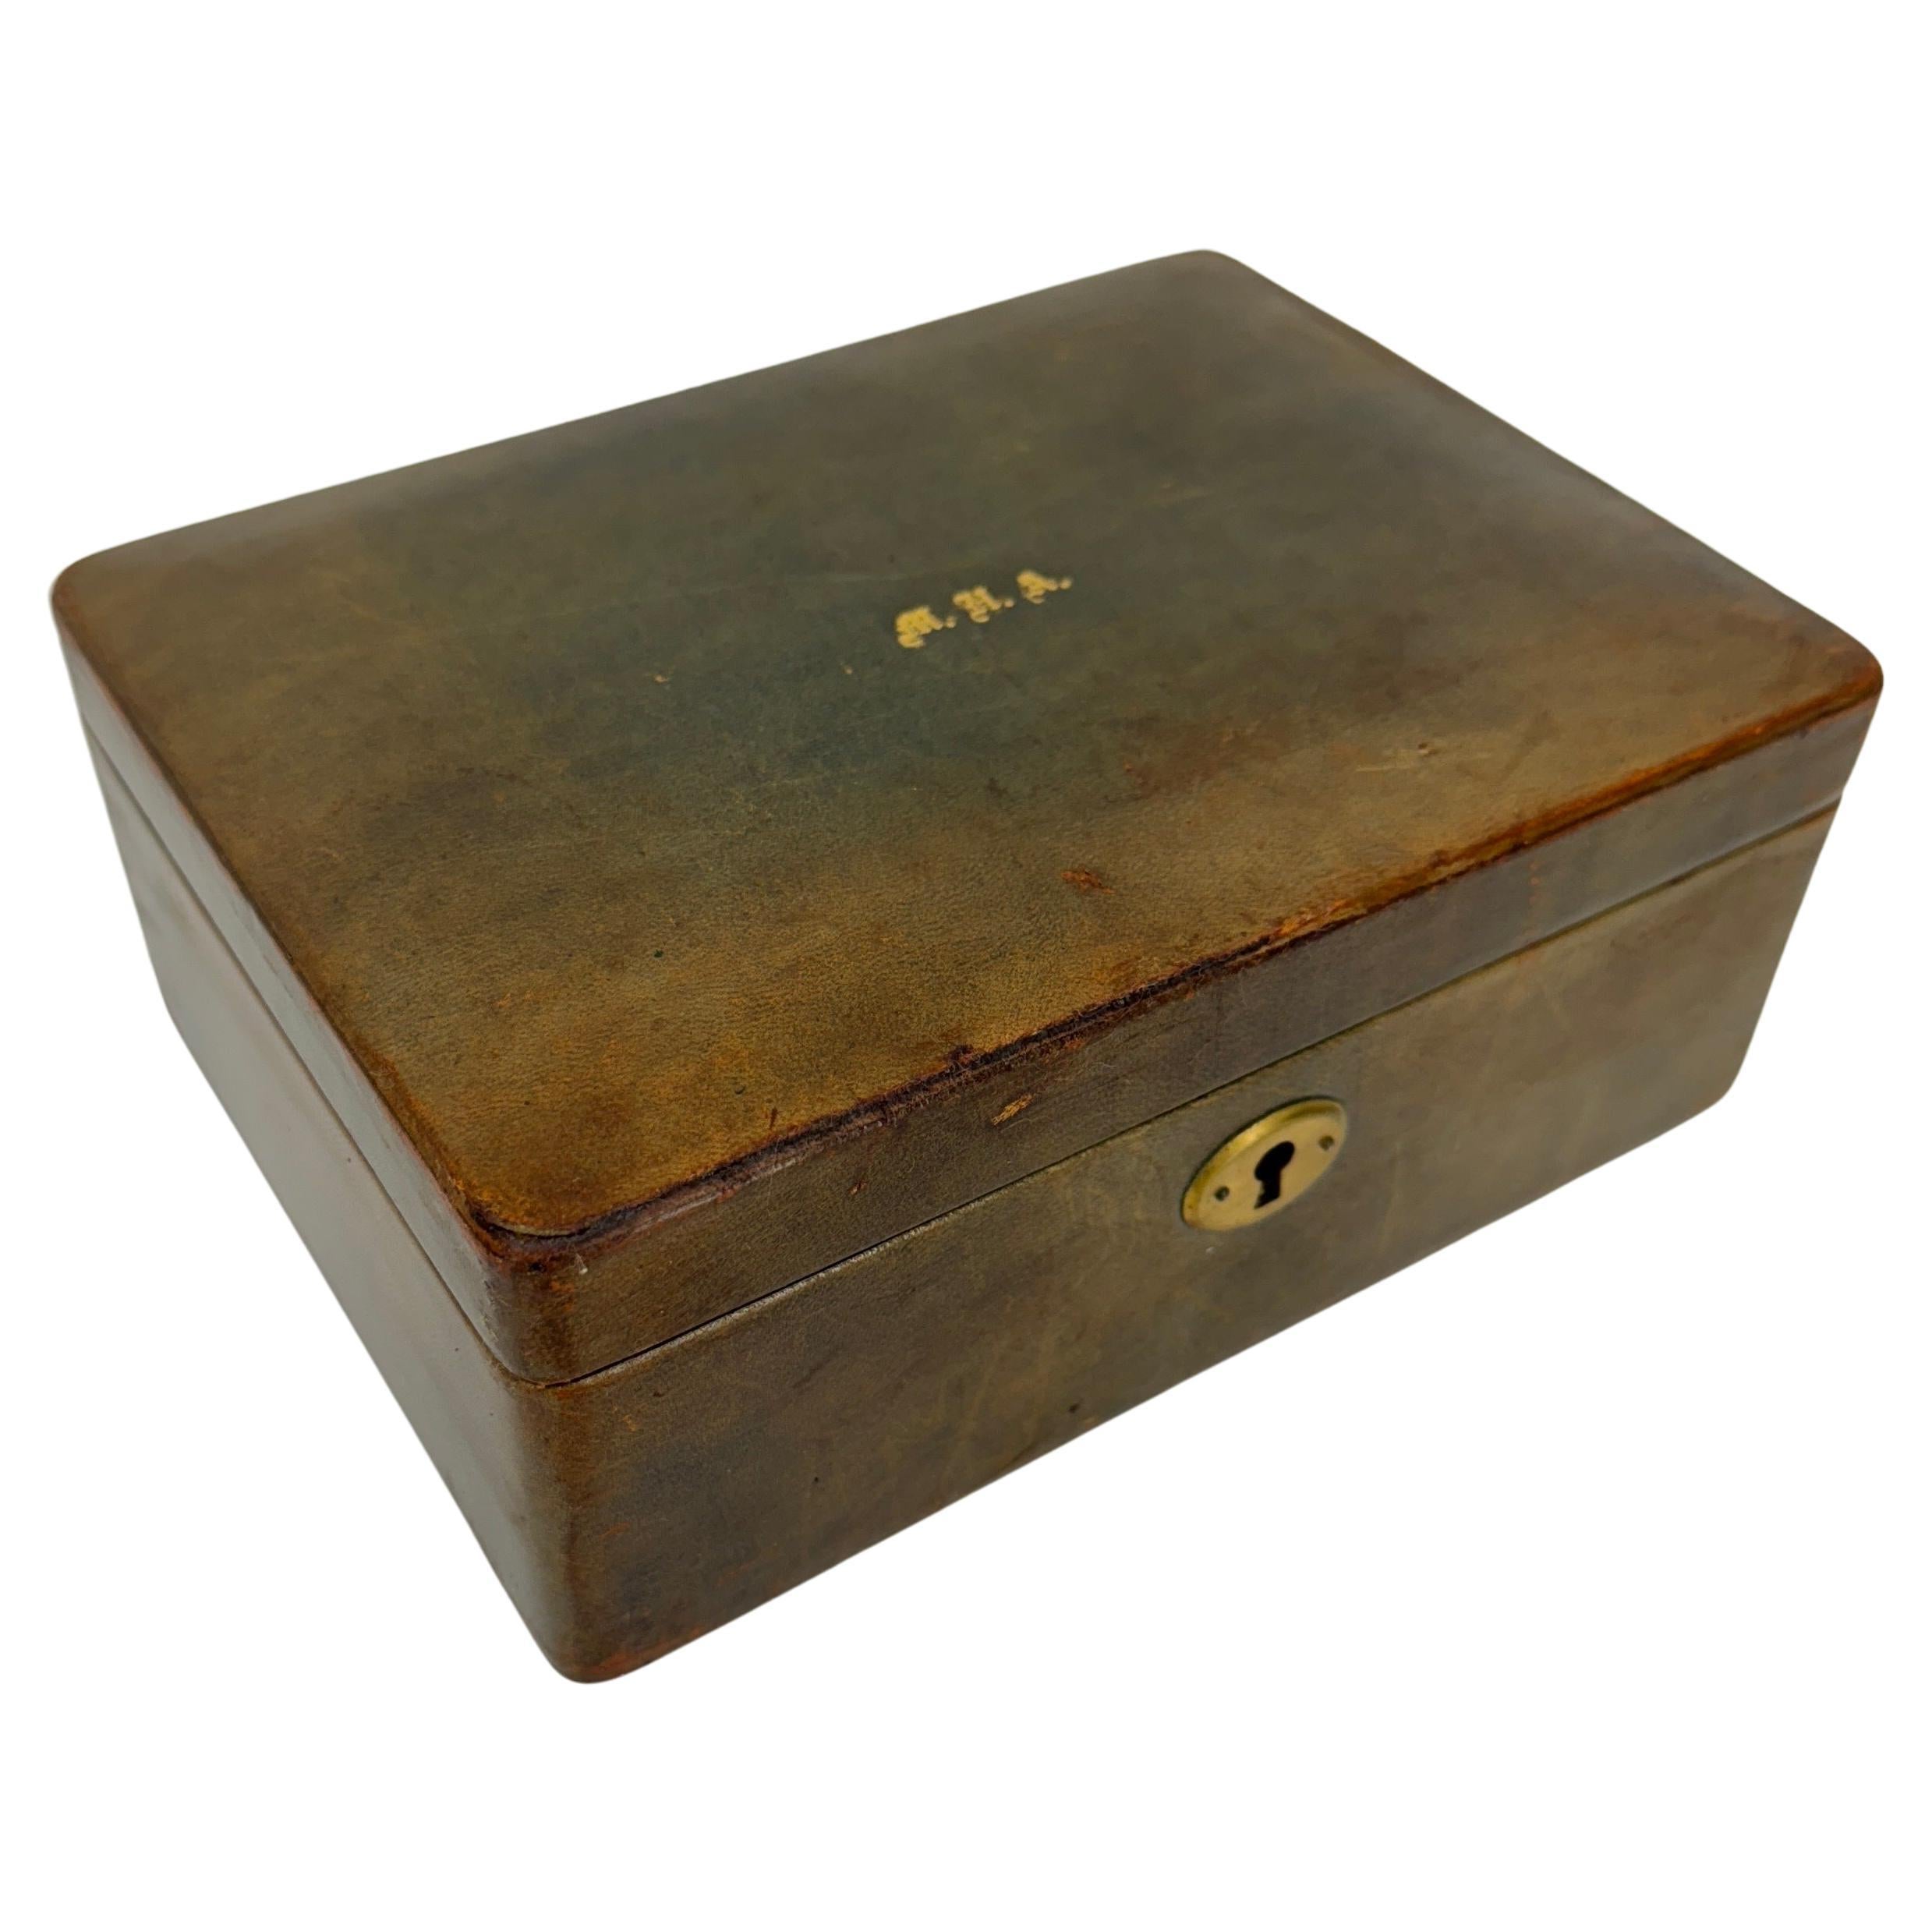 Mid-Size Leather Jewelry Box, Italy Circa 1950's

Feminine as well as charming mid-size leather box hand crafted in brown leather and gold embossed monogram. Monogram letters are M.H.A. The interior features green moire fabric. Marked Rumpp on the